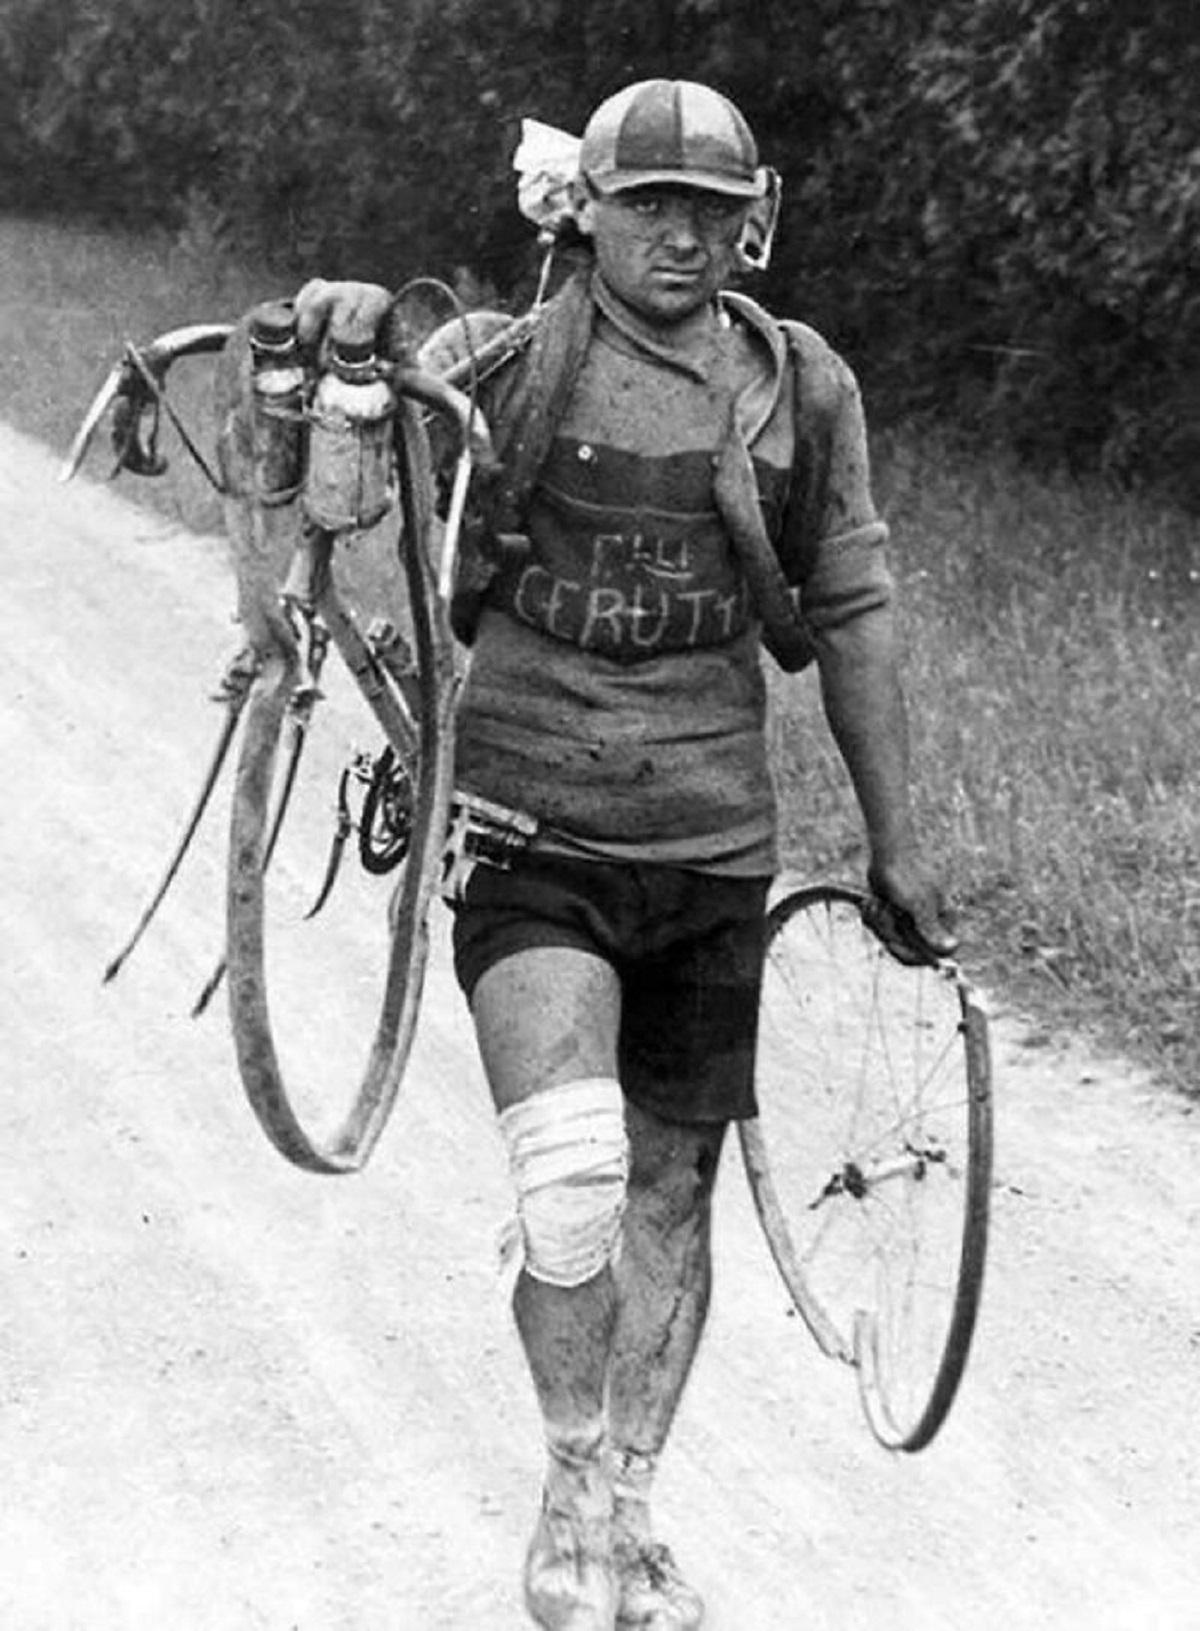 “Only In The Provinces Are The Great Melancholy Cultivated, The Silence And Solitude Essential To Succeed In Such A Tiring Sport As Cycling” The Words Of Gianni Brera Are Reflected On The Face Of Giusto Cerutti, The Piedmontese Runner Immortalized During The 1928 Tour De France